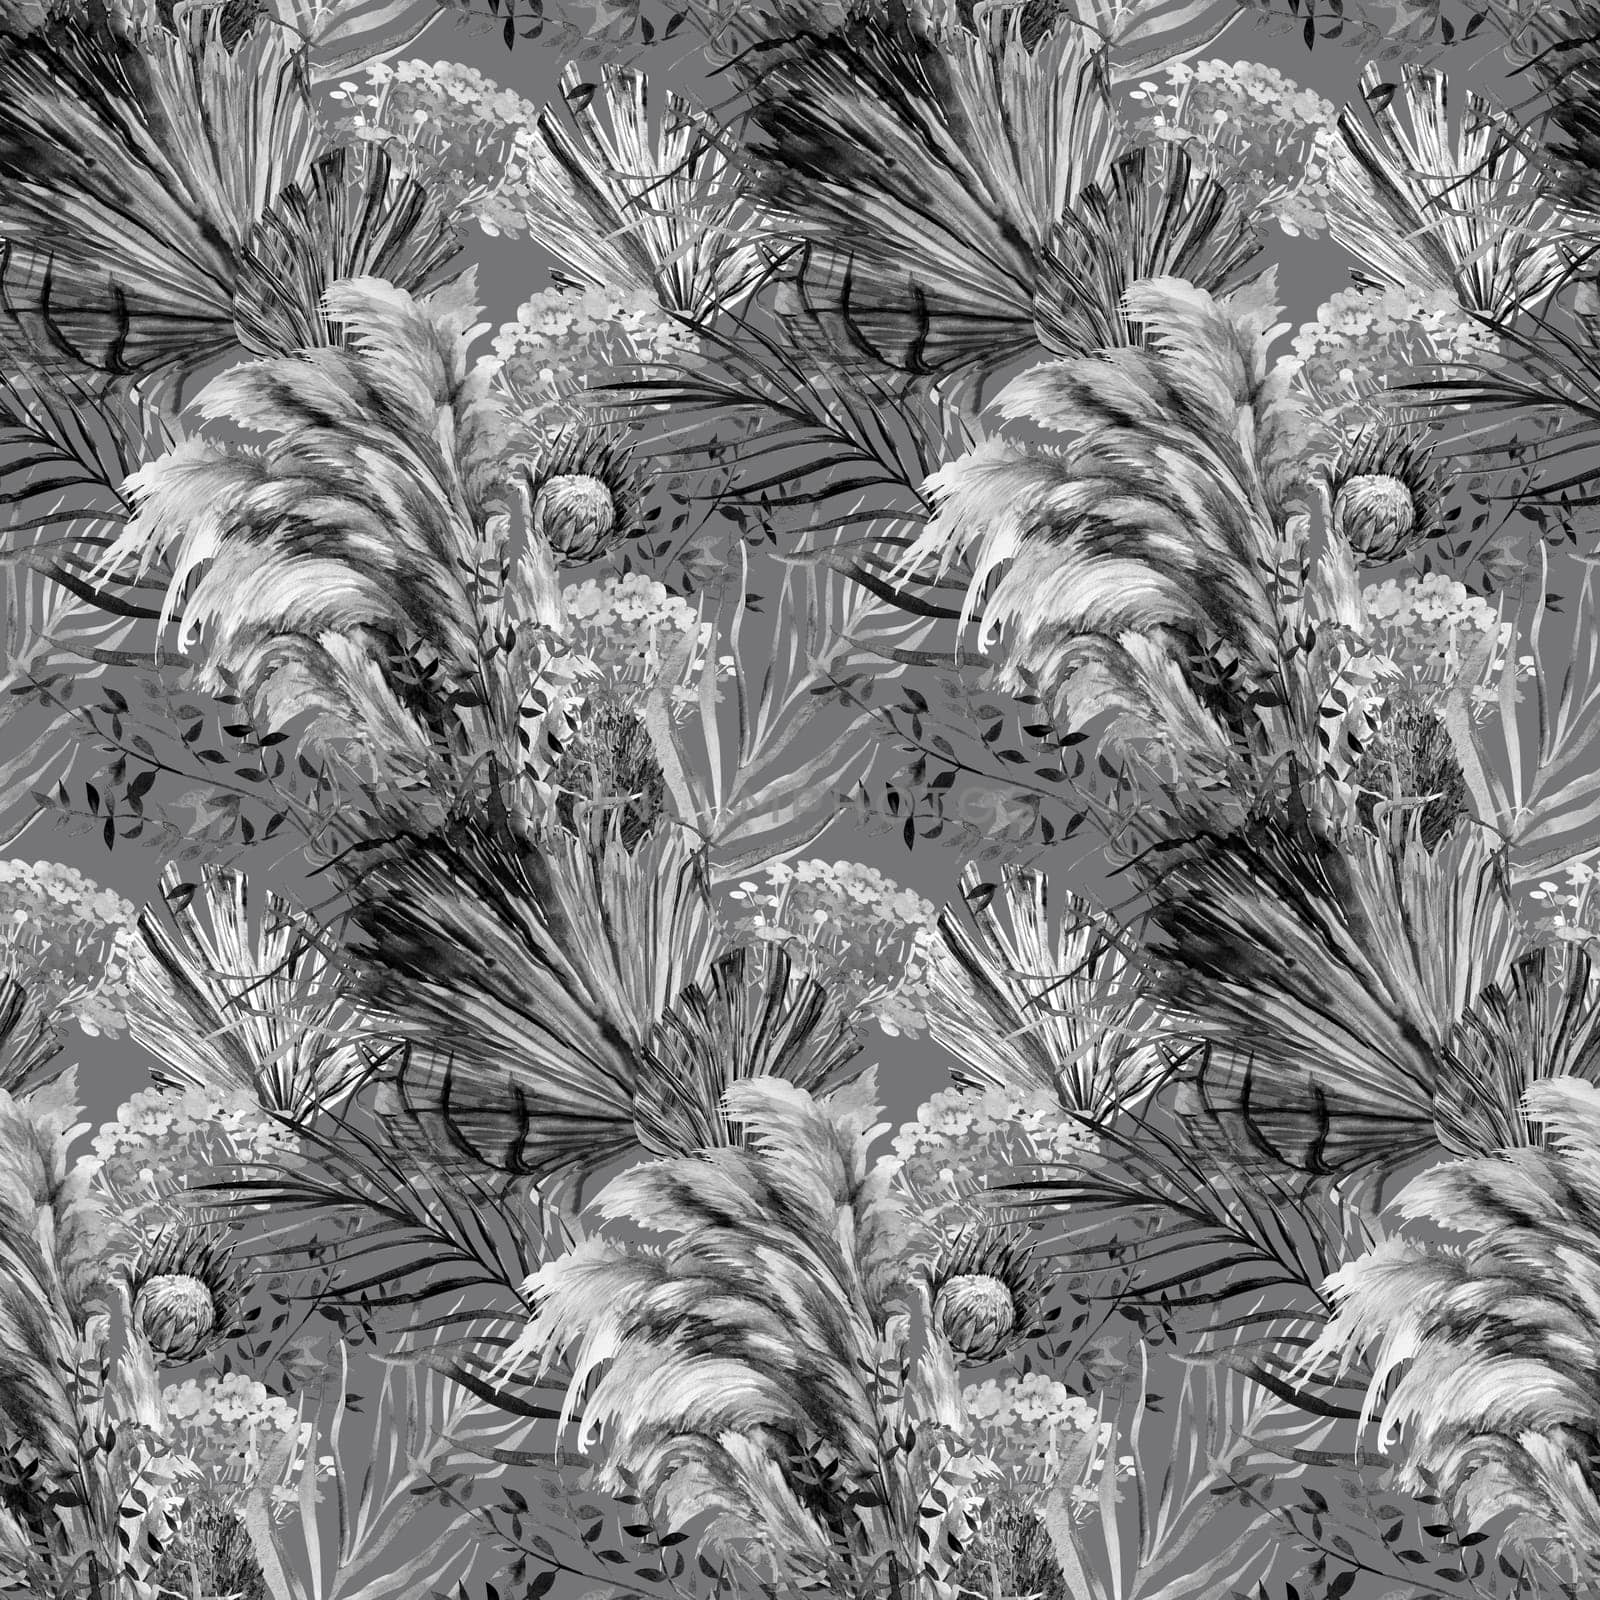 Monochrome watercolor seamless pattern with herbarium of protea flowers and tropical palm leaves for textile